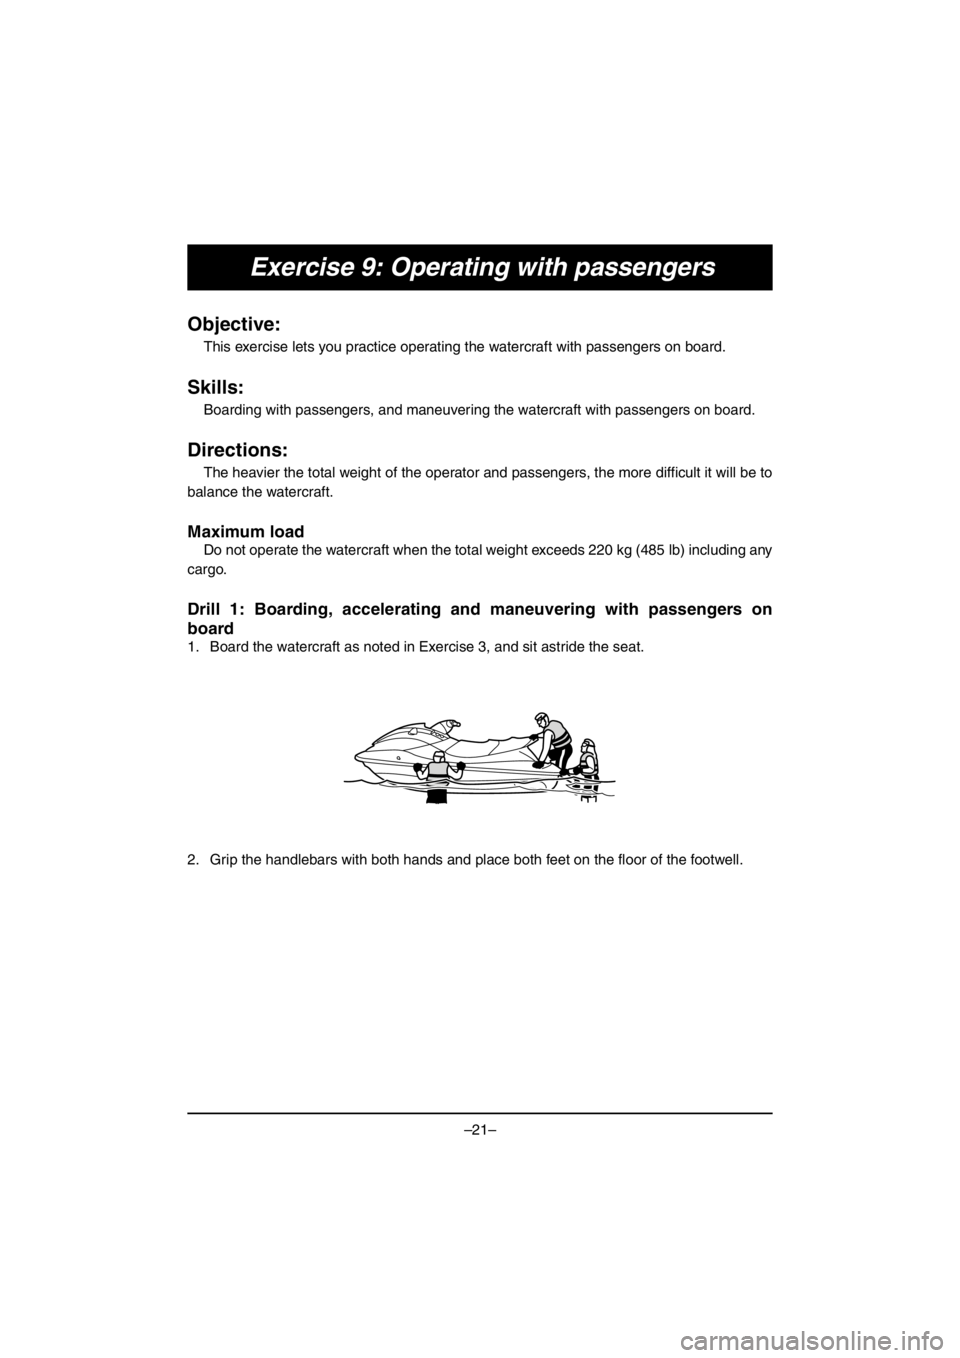 YAMAHA EX 2017  Notices Demploi (in French) –21–
Exercise 9: Operating with passengers
Objective:
This exercise lets you practice operating the watercraft with passengers on board.
Skills:
Boarding with passengers, and maneuvering the water